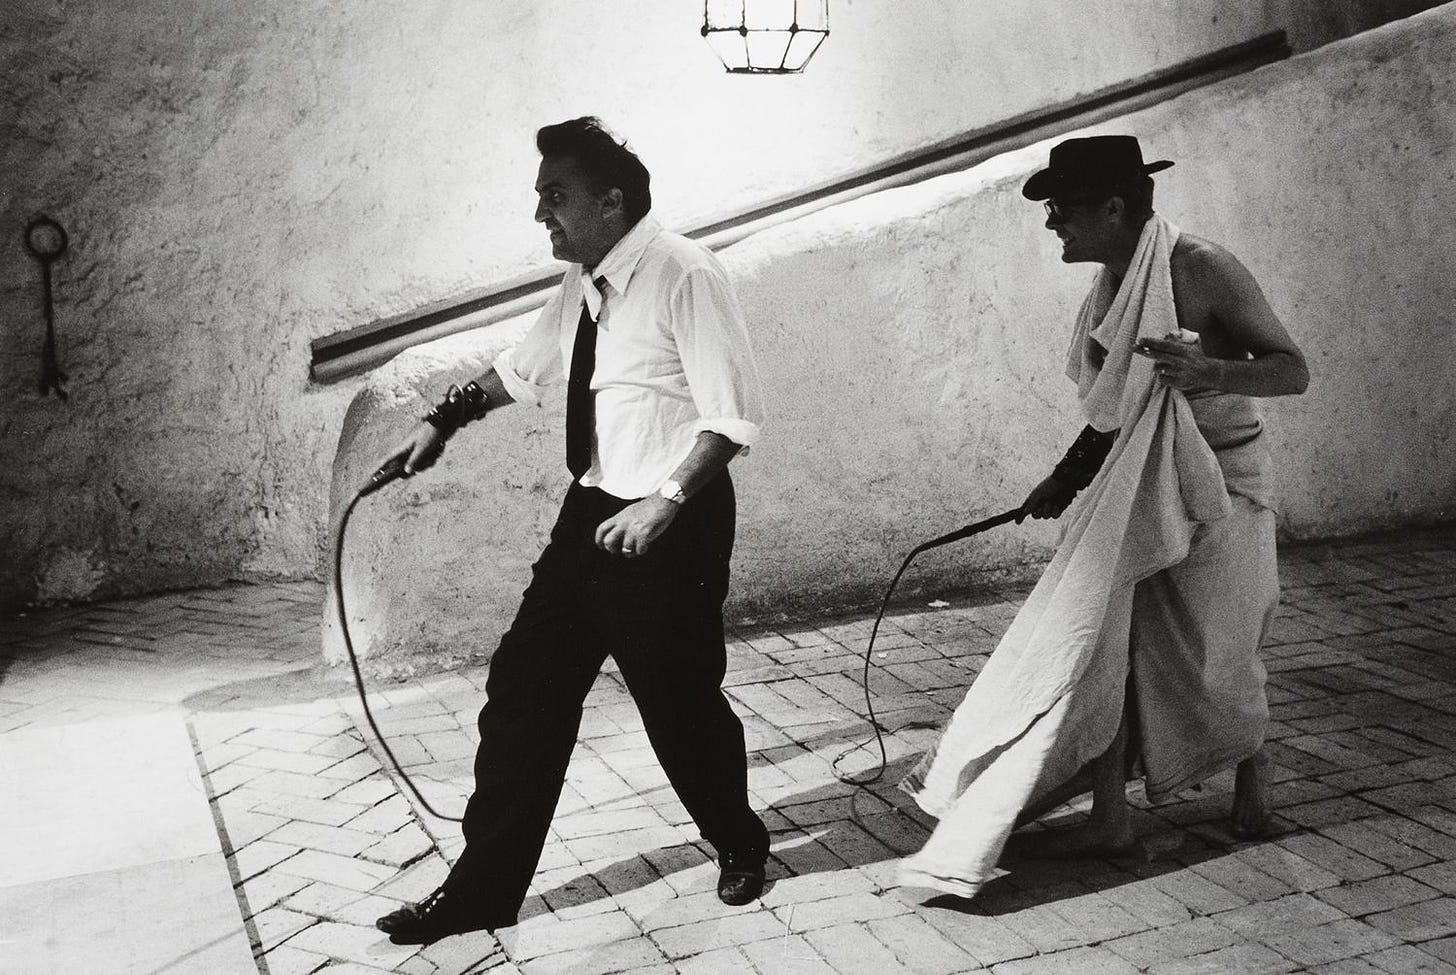 Federico Fellini and Marcello Mastroianni wield whips on set of "8 1/2" (1963)